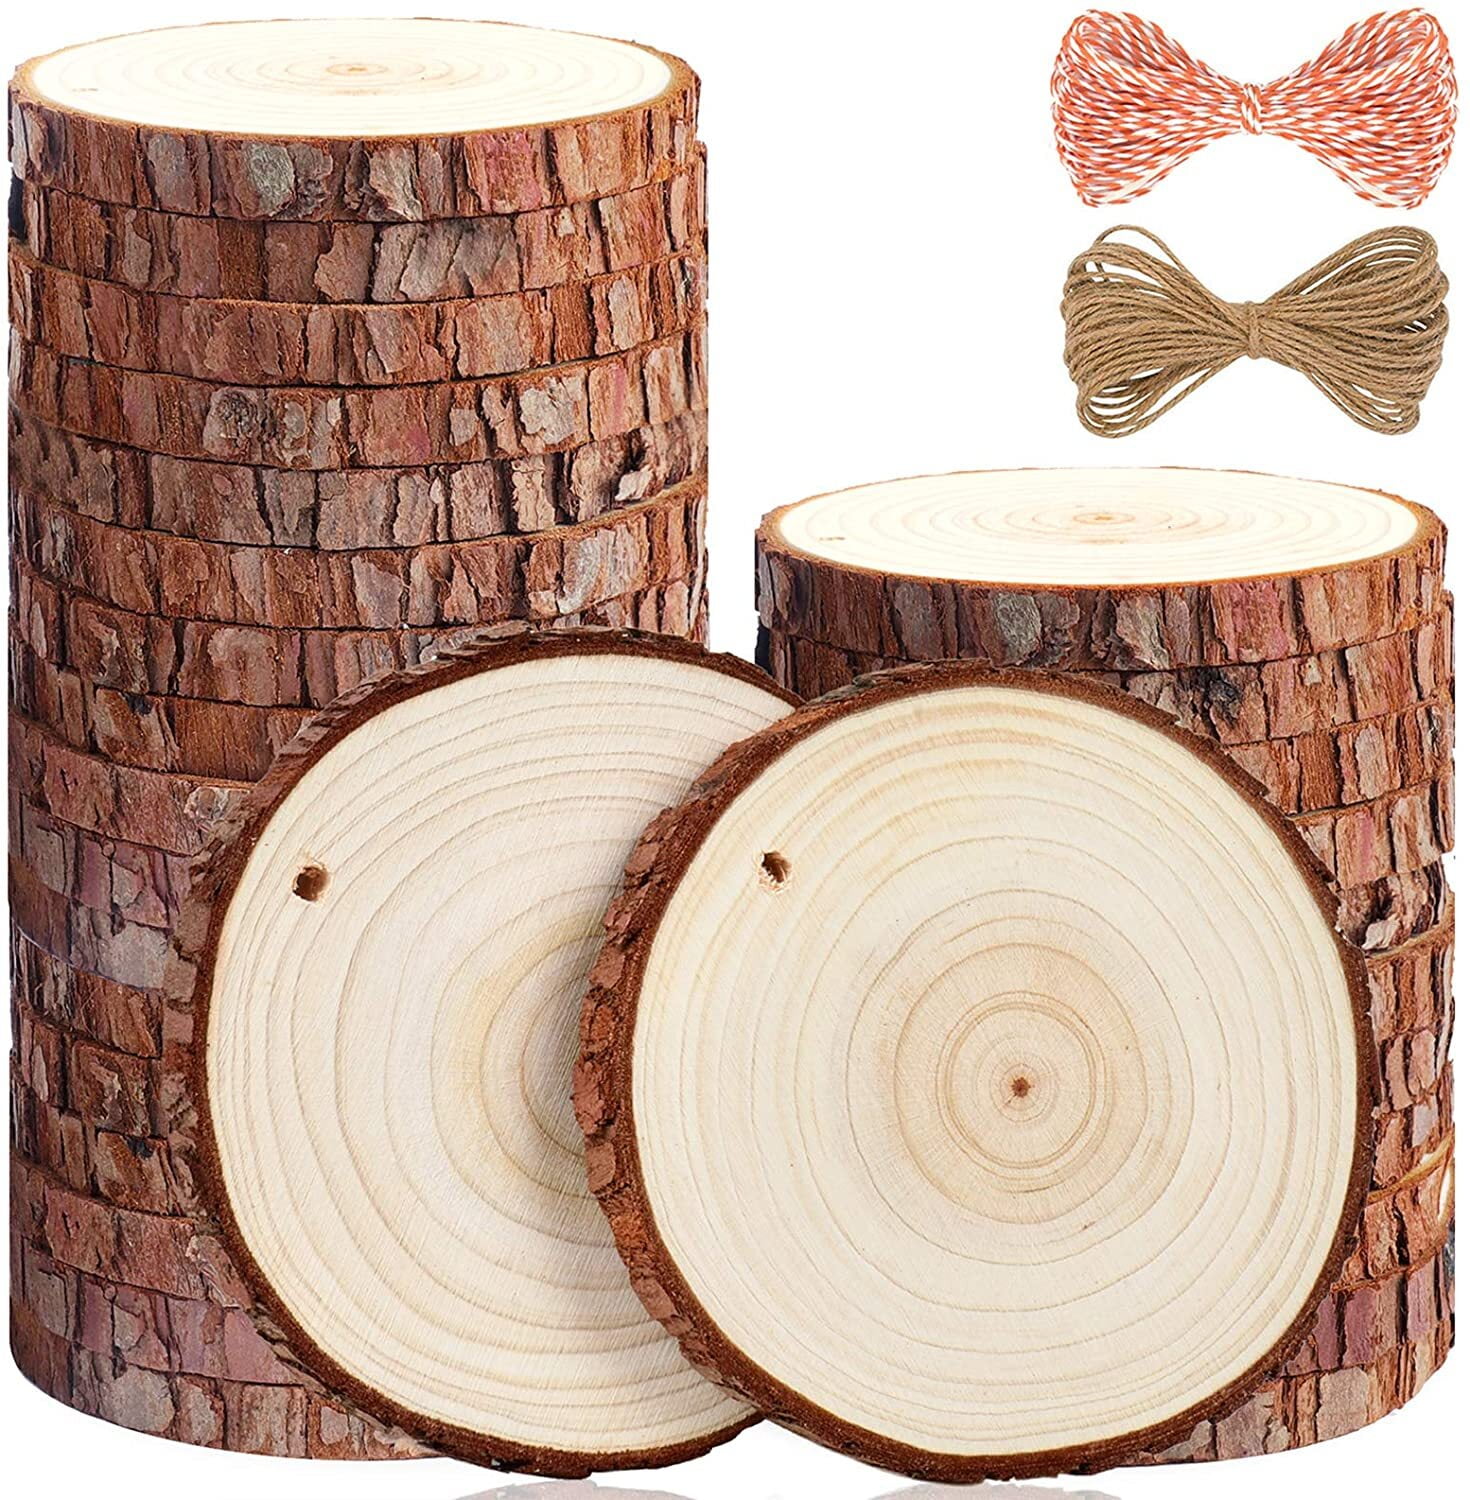 Natural Wood Slices 30 Pcs 3.5-4 inch Craft Unfinished Wood Kit Predrilled  with Hole Wooden Circles Wood Rounds for Arts Wood Slices Christmas